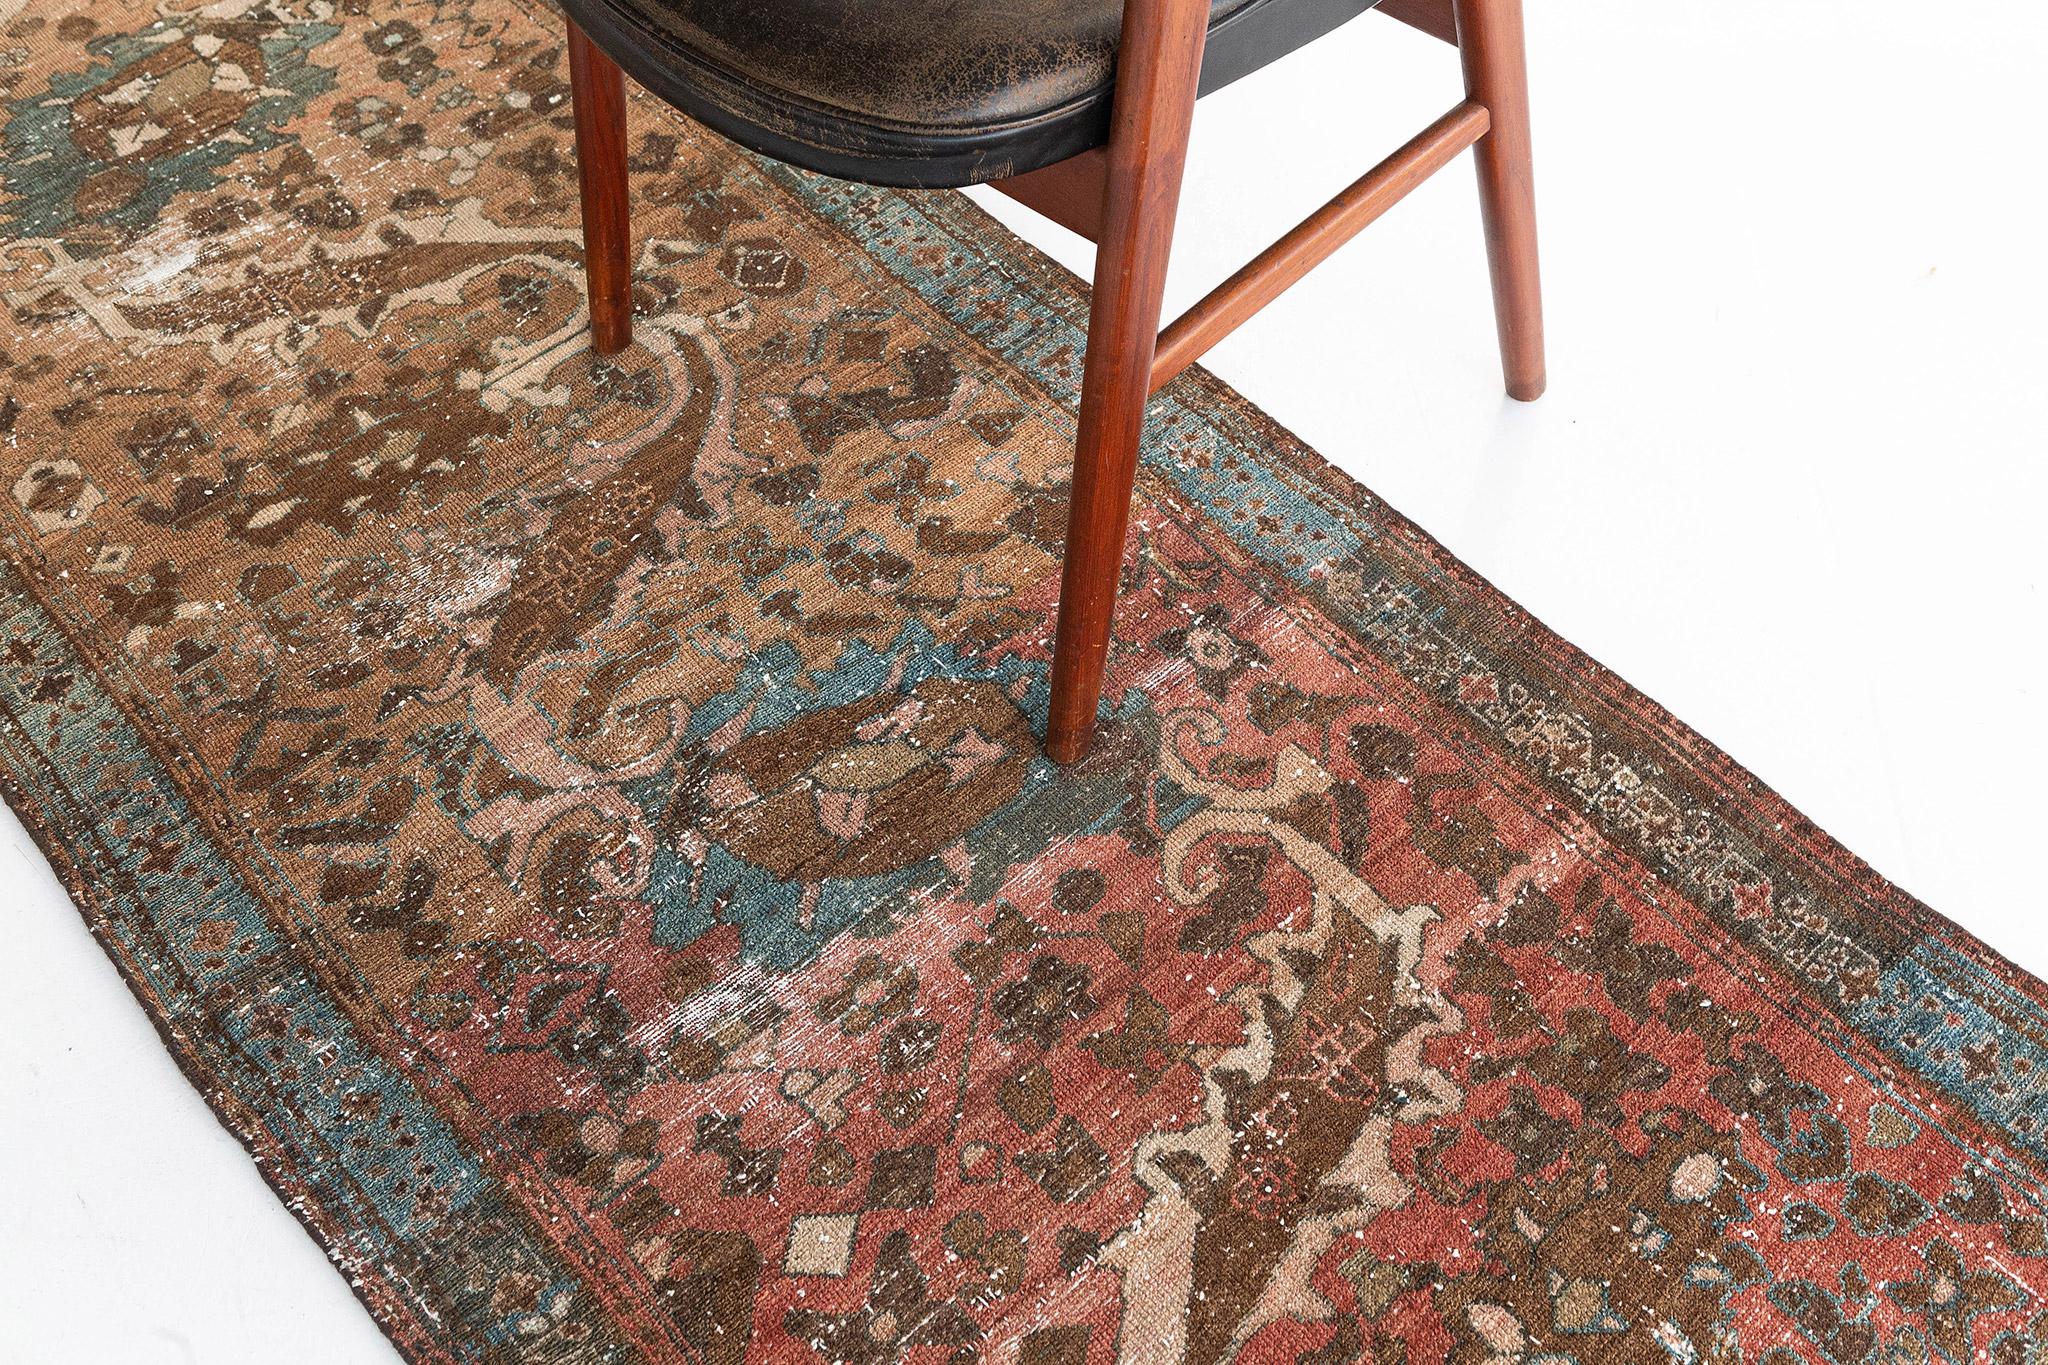 A mesmerizing antique Persian Lilihan runner that emanates a balanced and timeless floral design with a lovingly timeworn patina. The abrashed tawny field is covered with an all-over botanical pattern composed of blooming palmettes, serrated leaves,